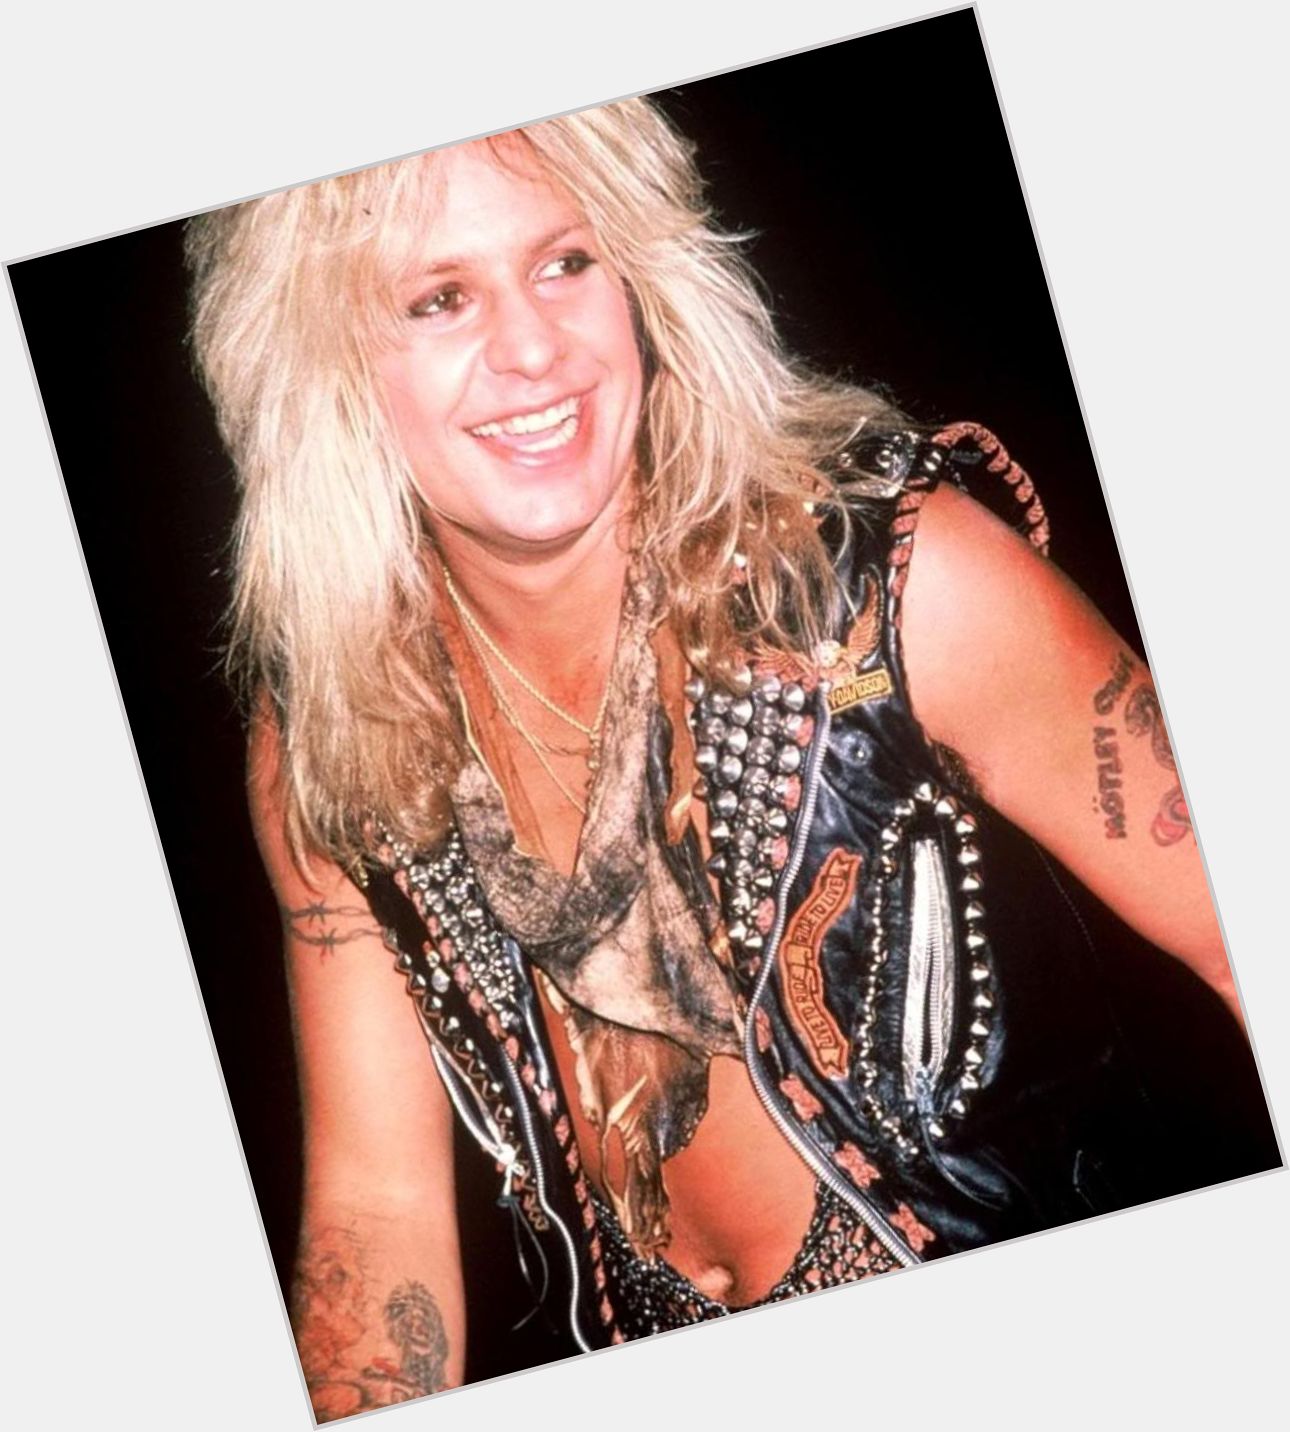 Happy Birthday to Mötley Crüe Singer Vince Neil. He turns 60 today. 